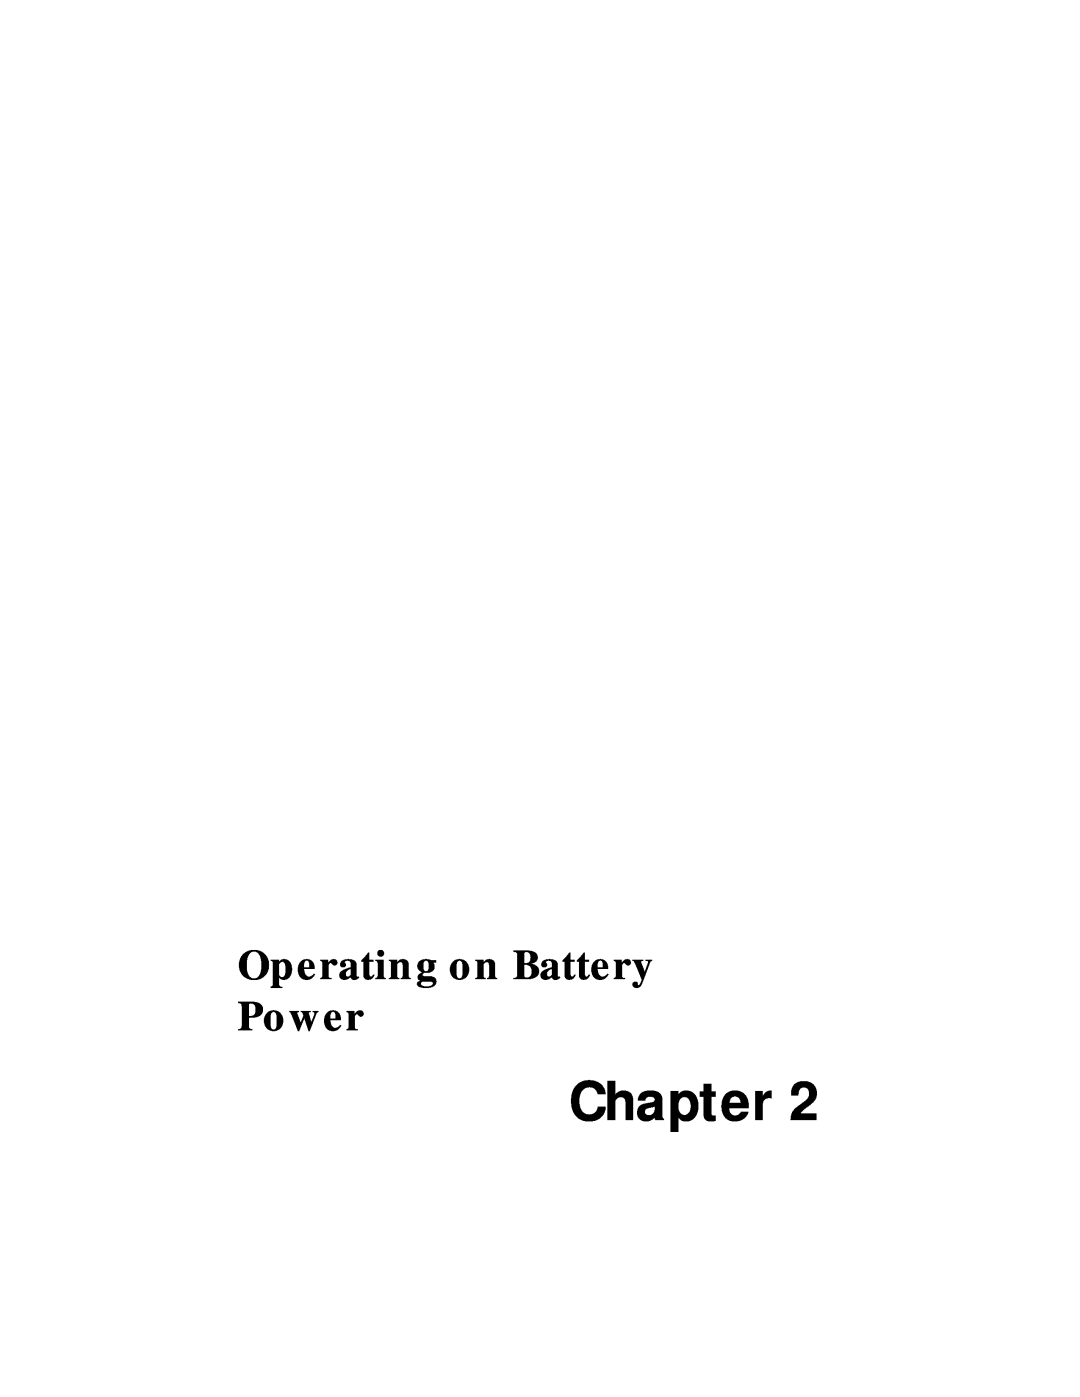 Acer 330 Series manual Operating on Battery Power, Chapter 